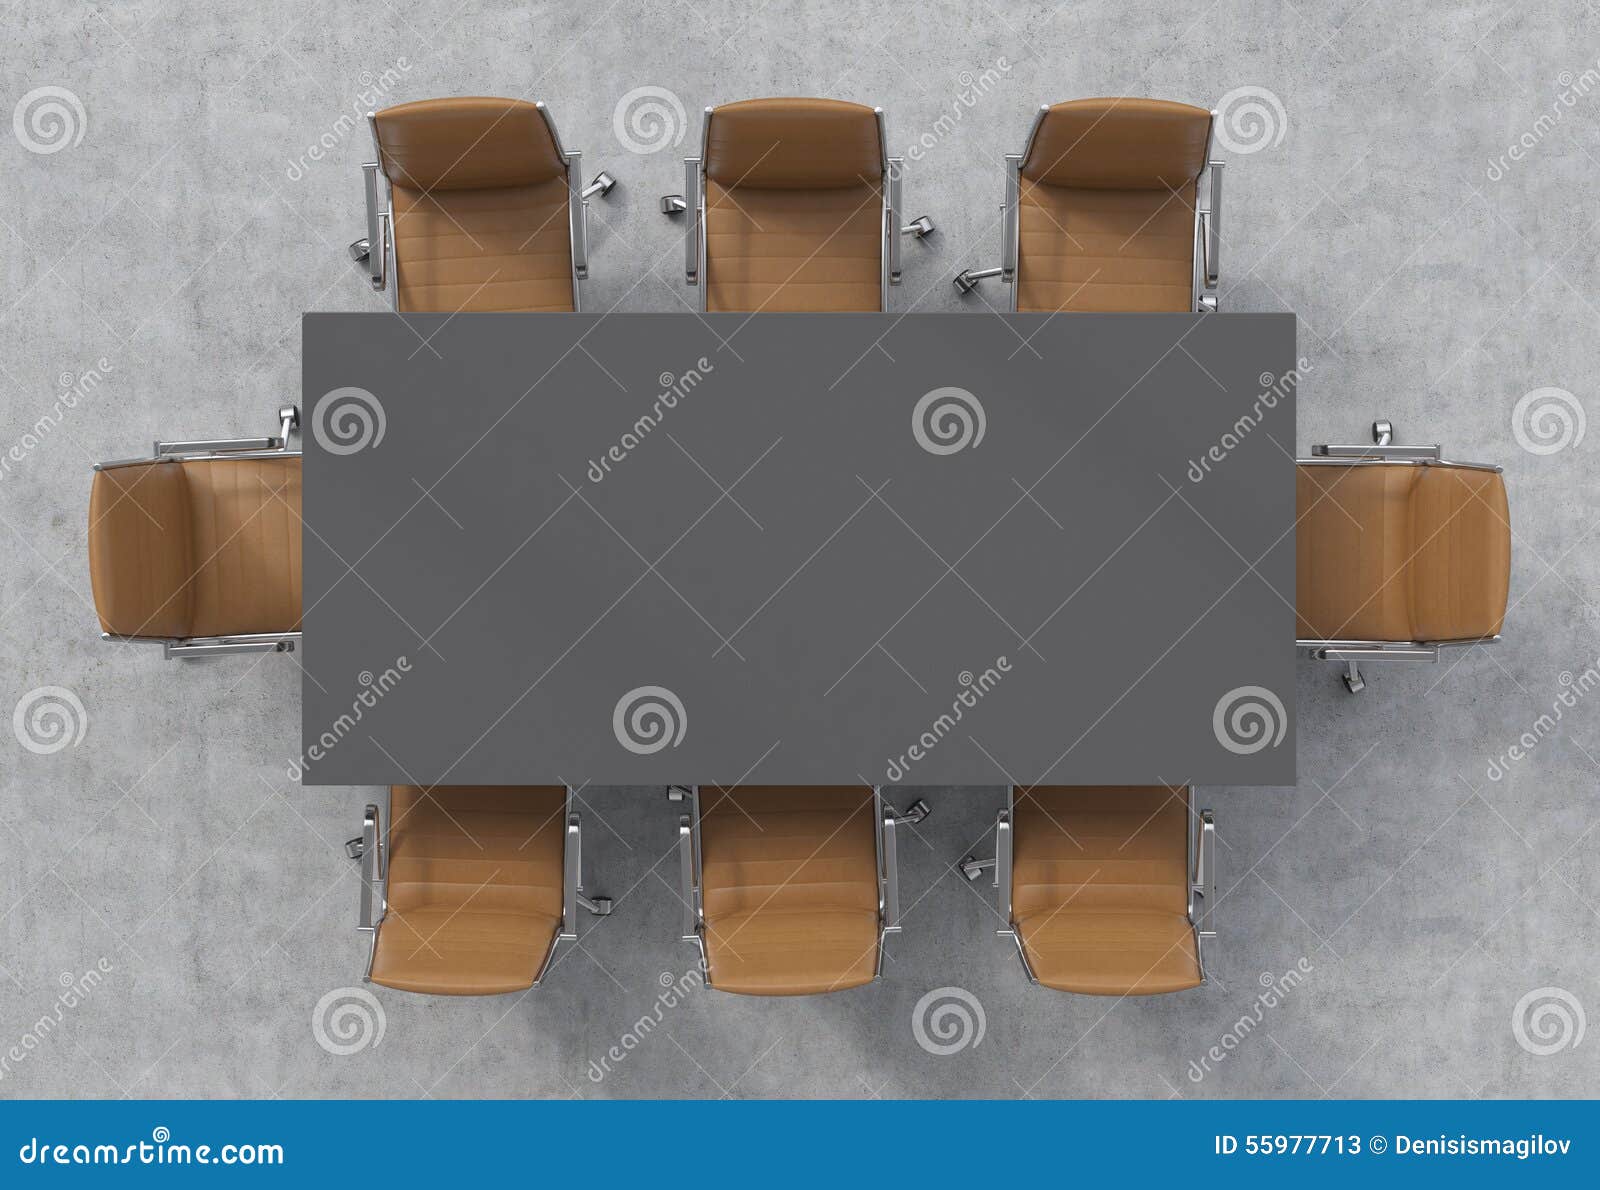 Top View Of A Conference Room. A Dark Grey Rectangular 